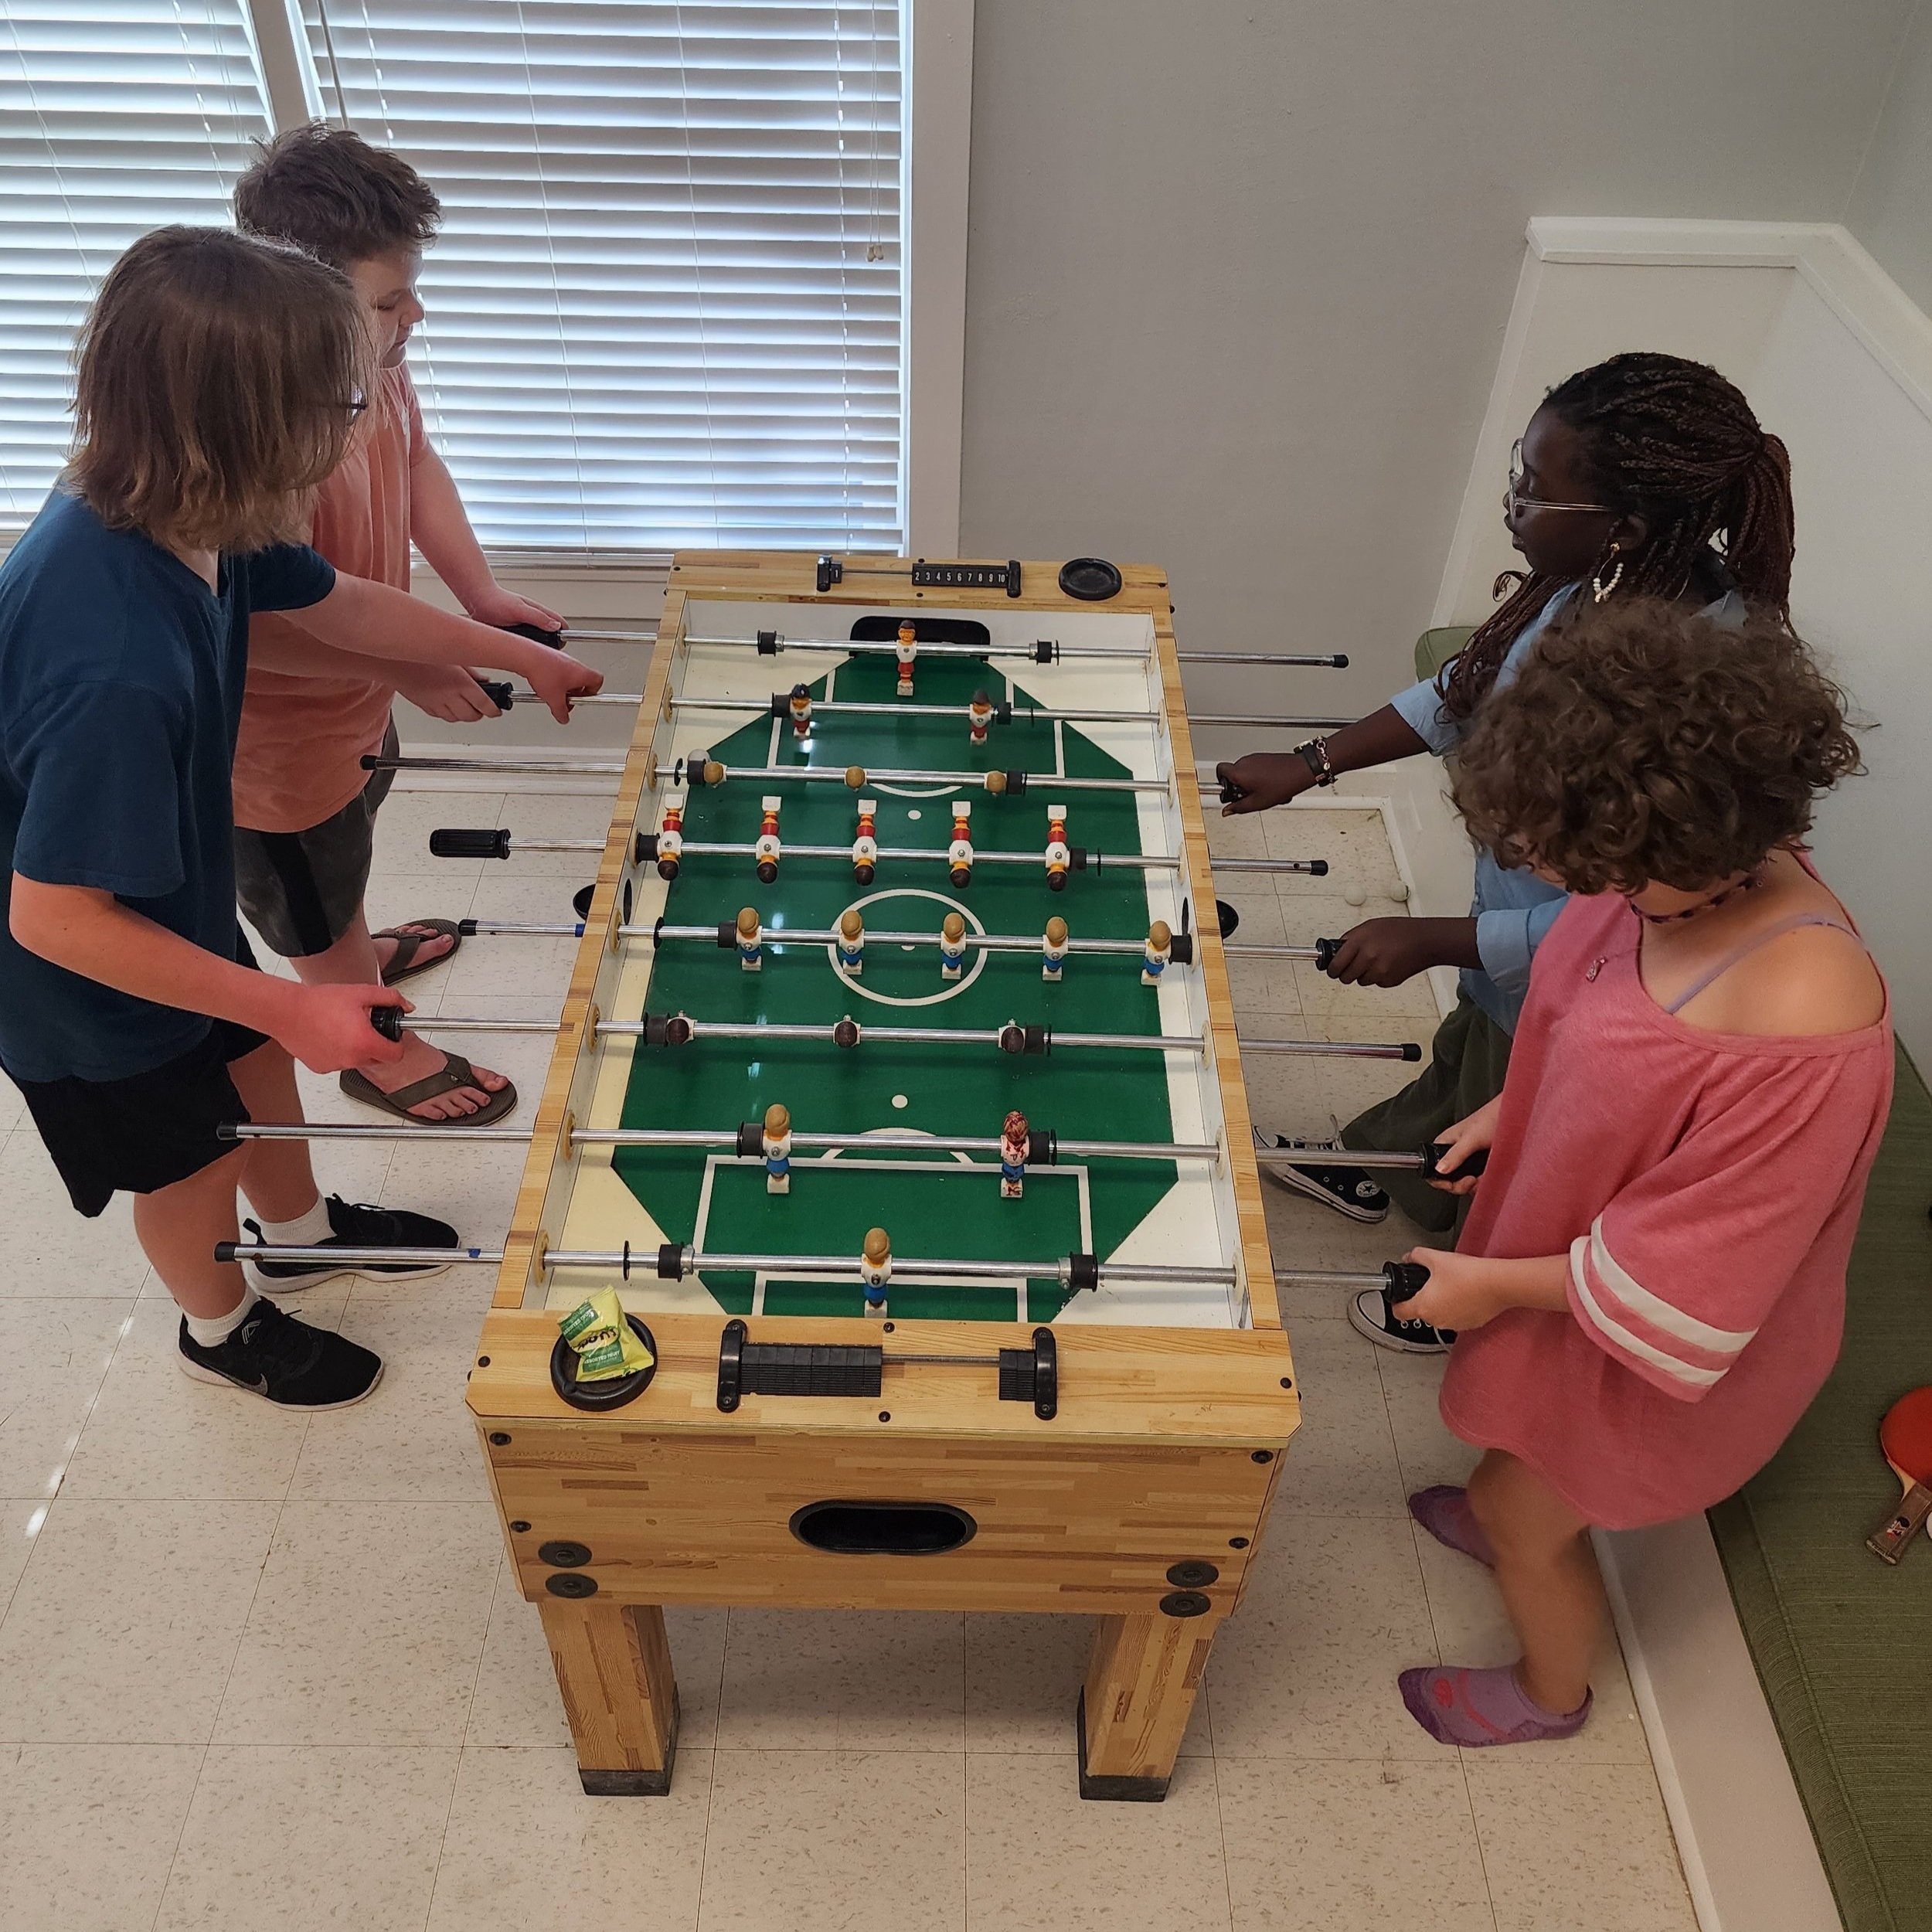 foosball in our free time